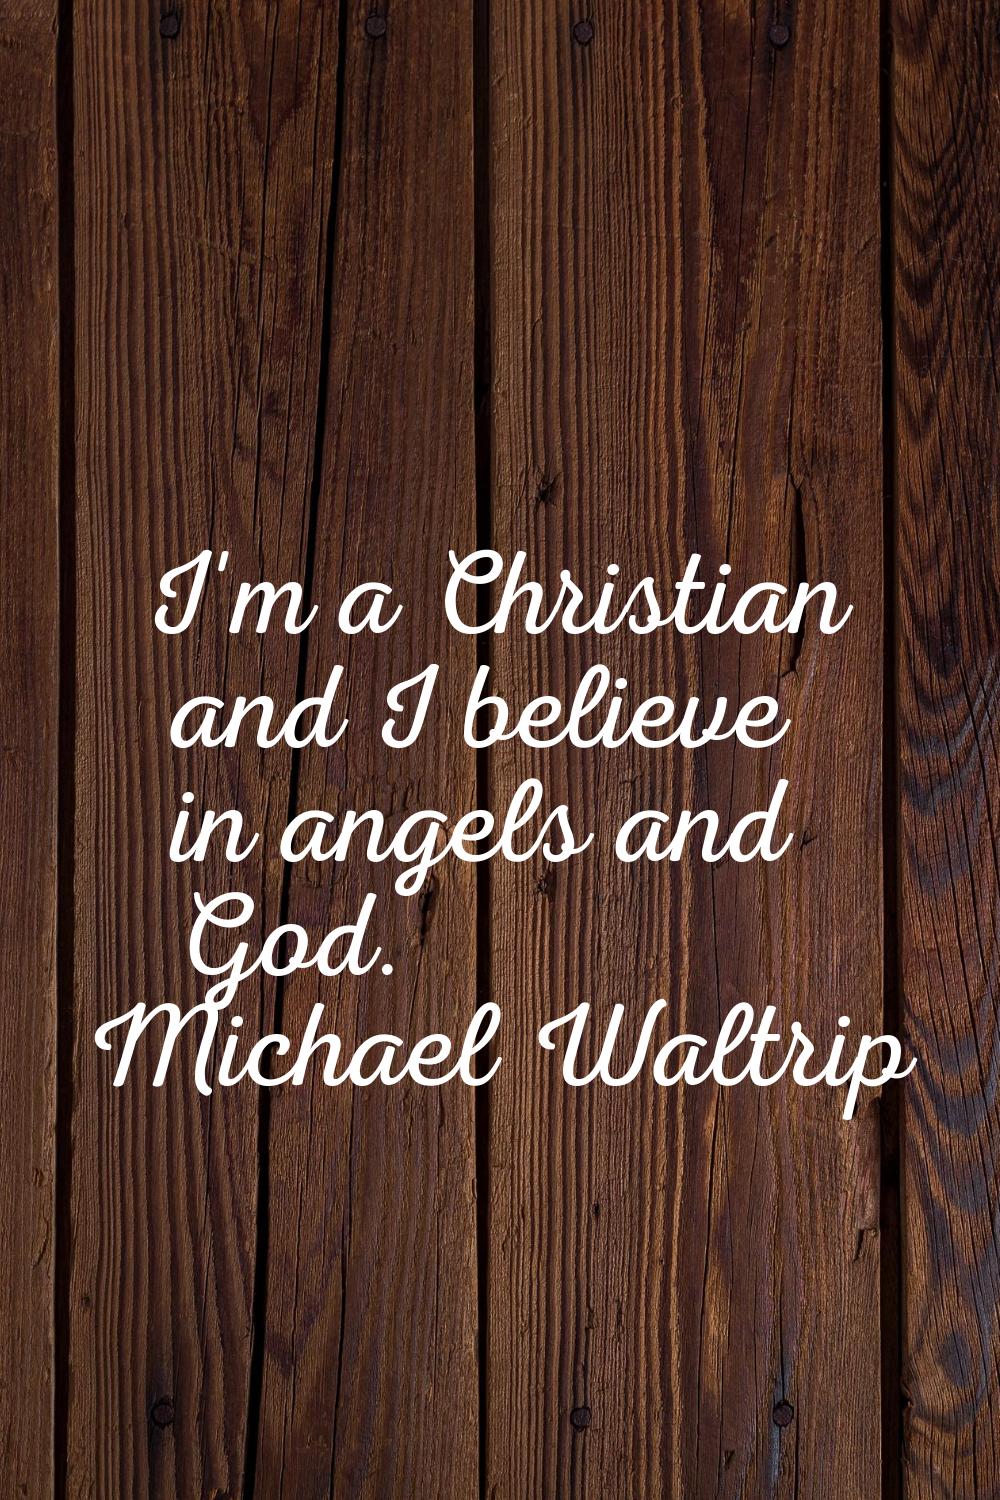 I'm a Christian and I believe in angels and God.